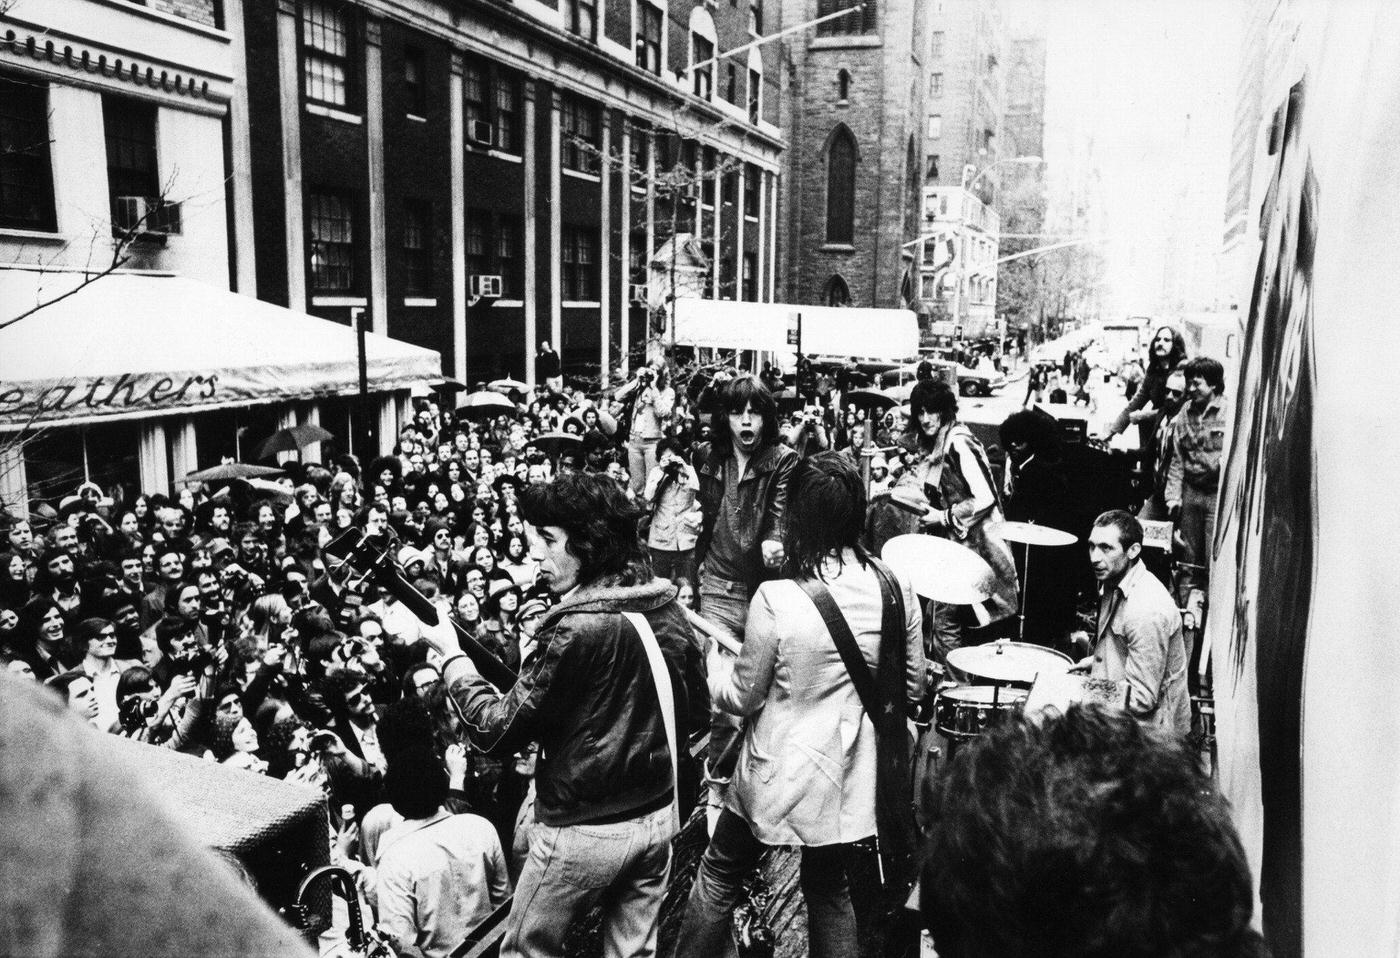 The Rolling Stones announce the 'Tour of the Americas '75' on a flatbed truck on 5th Avenue, New York, May 1975.